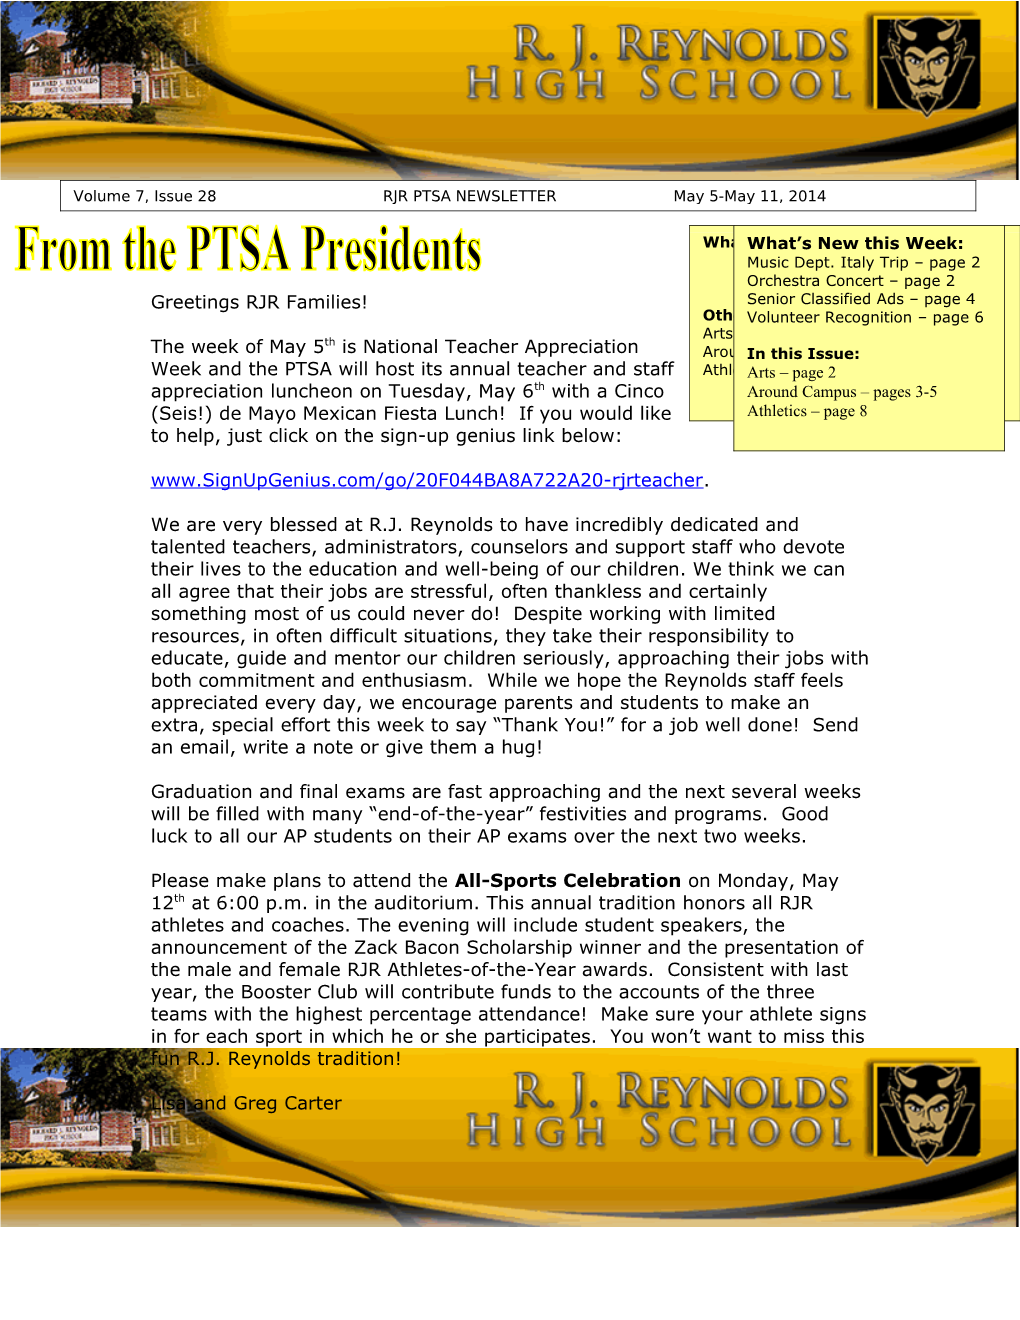 Week and the PTSA Will Host Its Annual Teacher and Staff